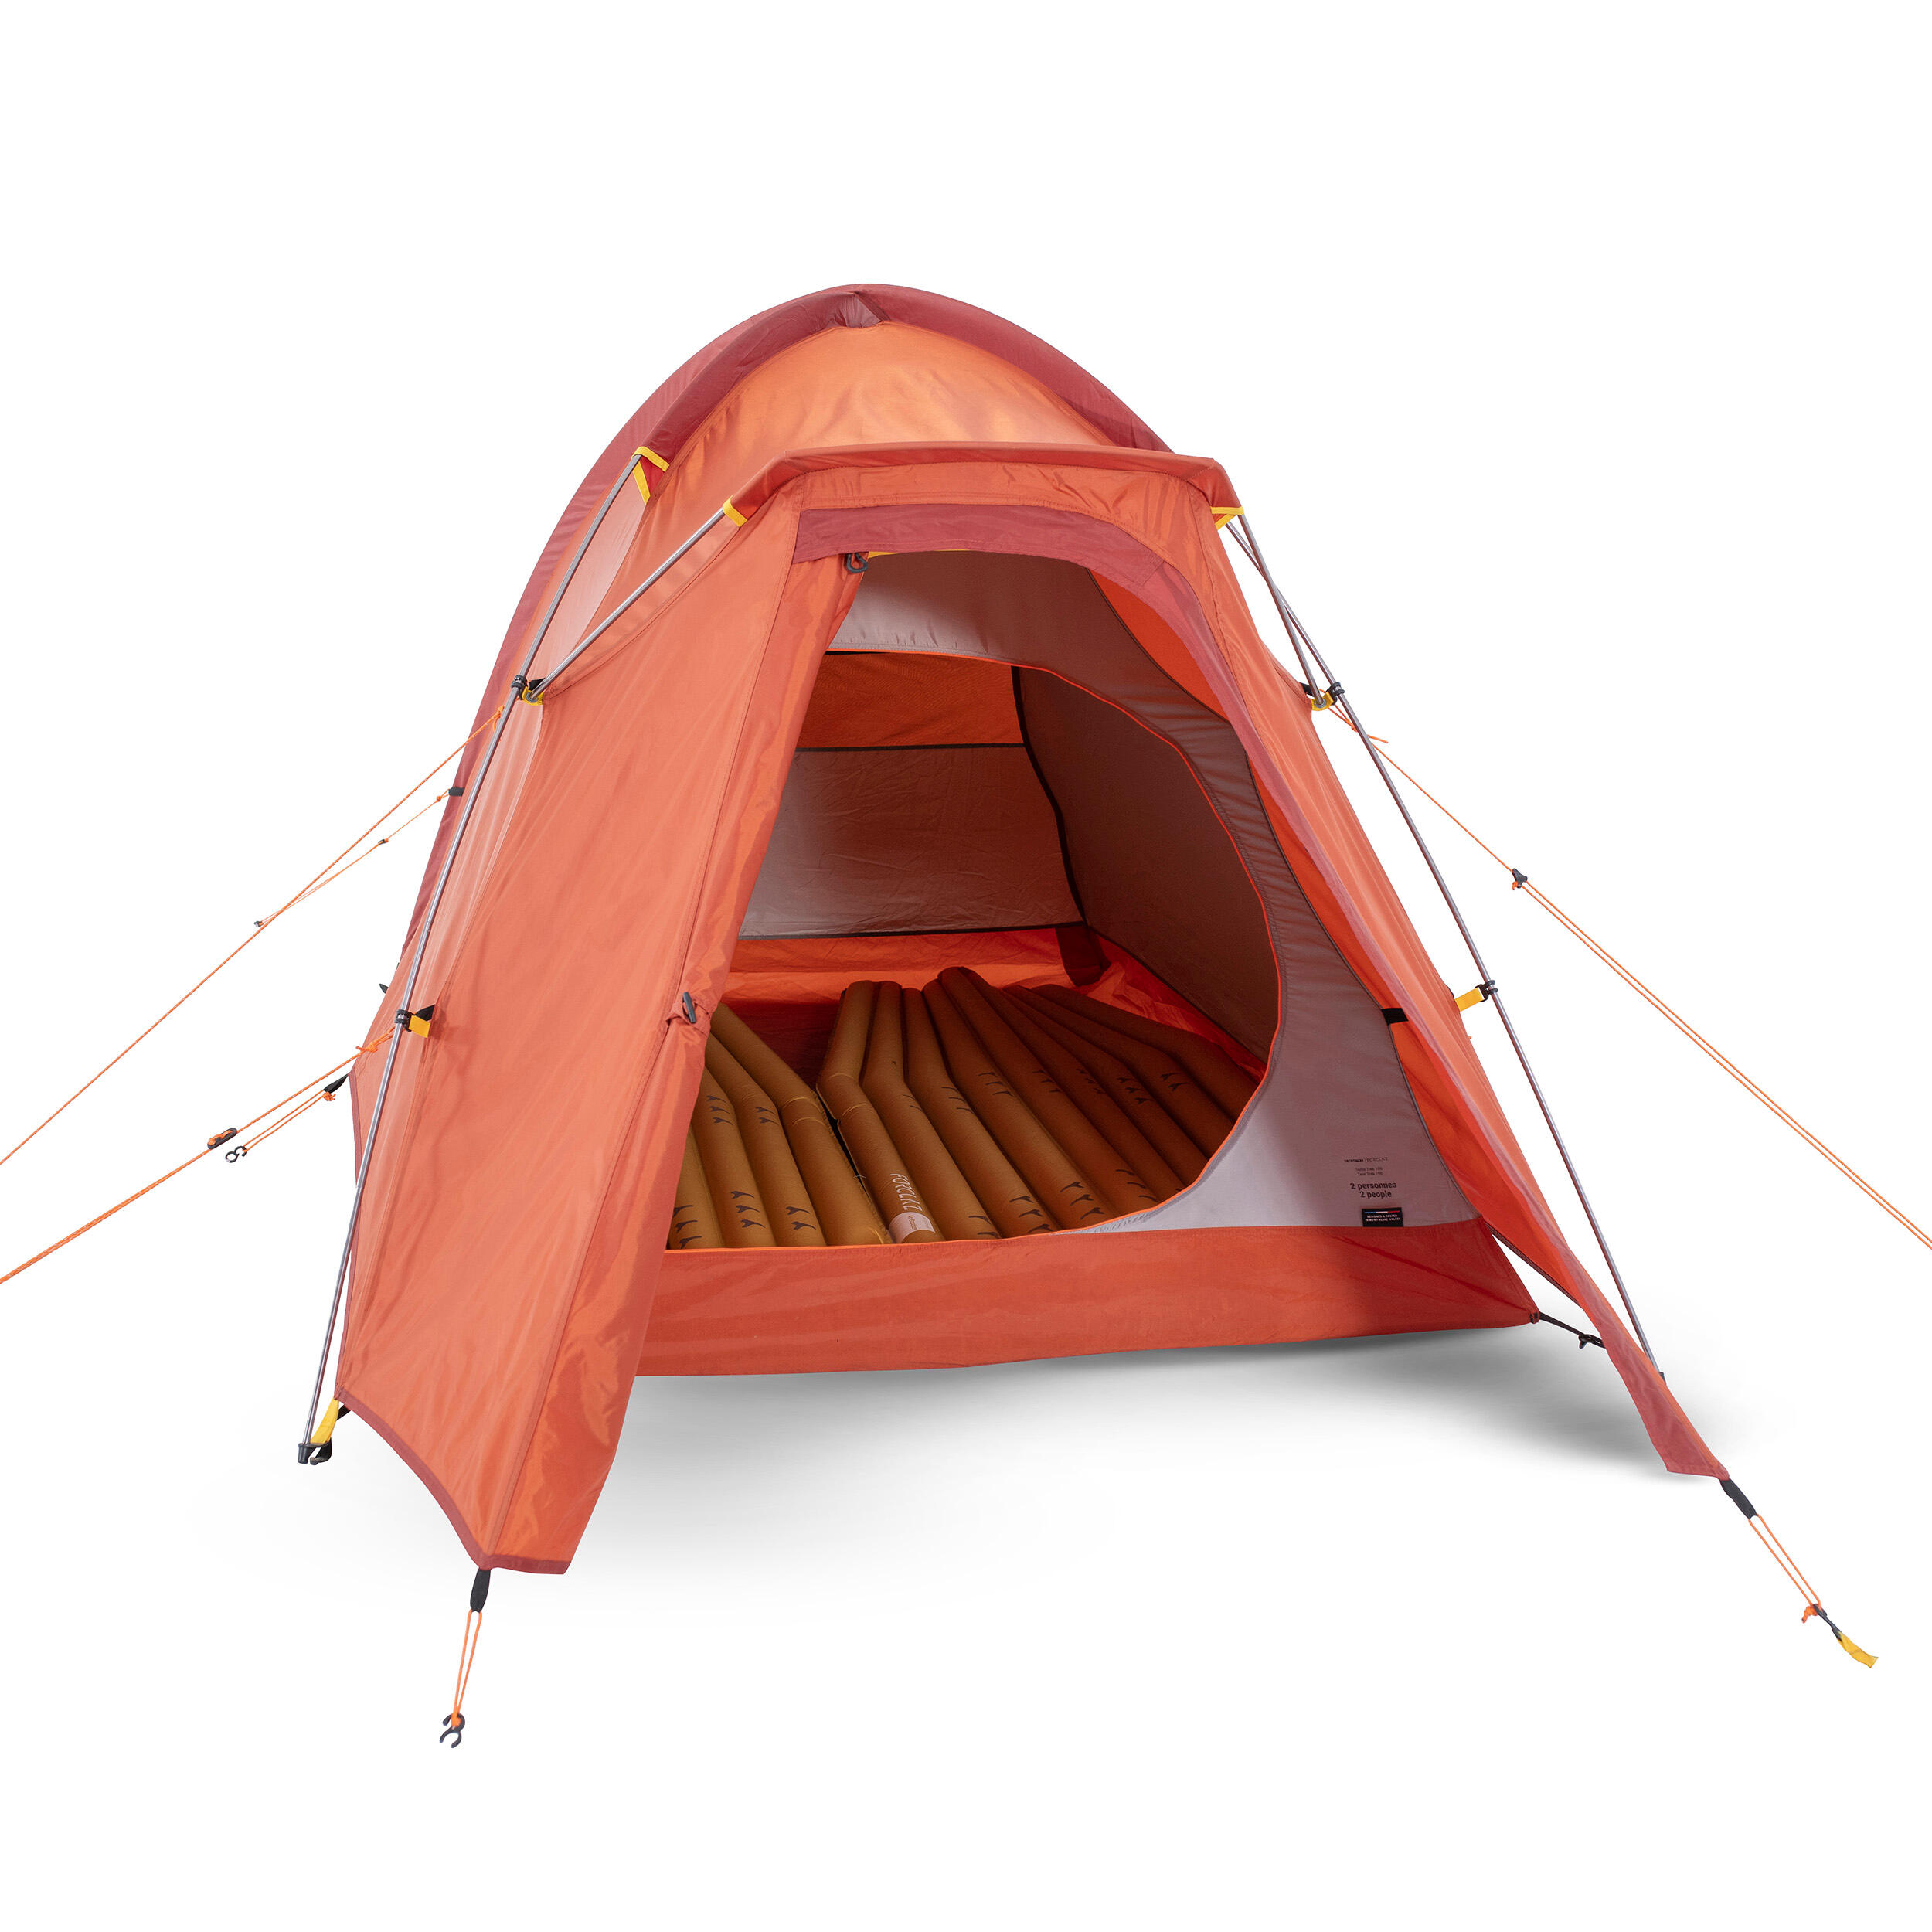 2-Person Backpacking Tent - MT 100 - Forclaz - Decathlon